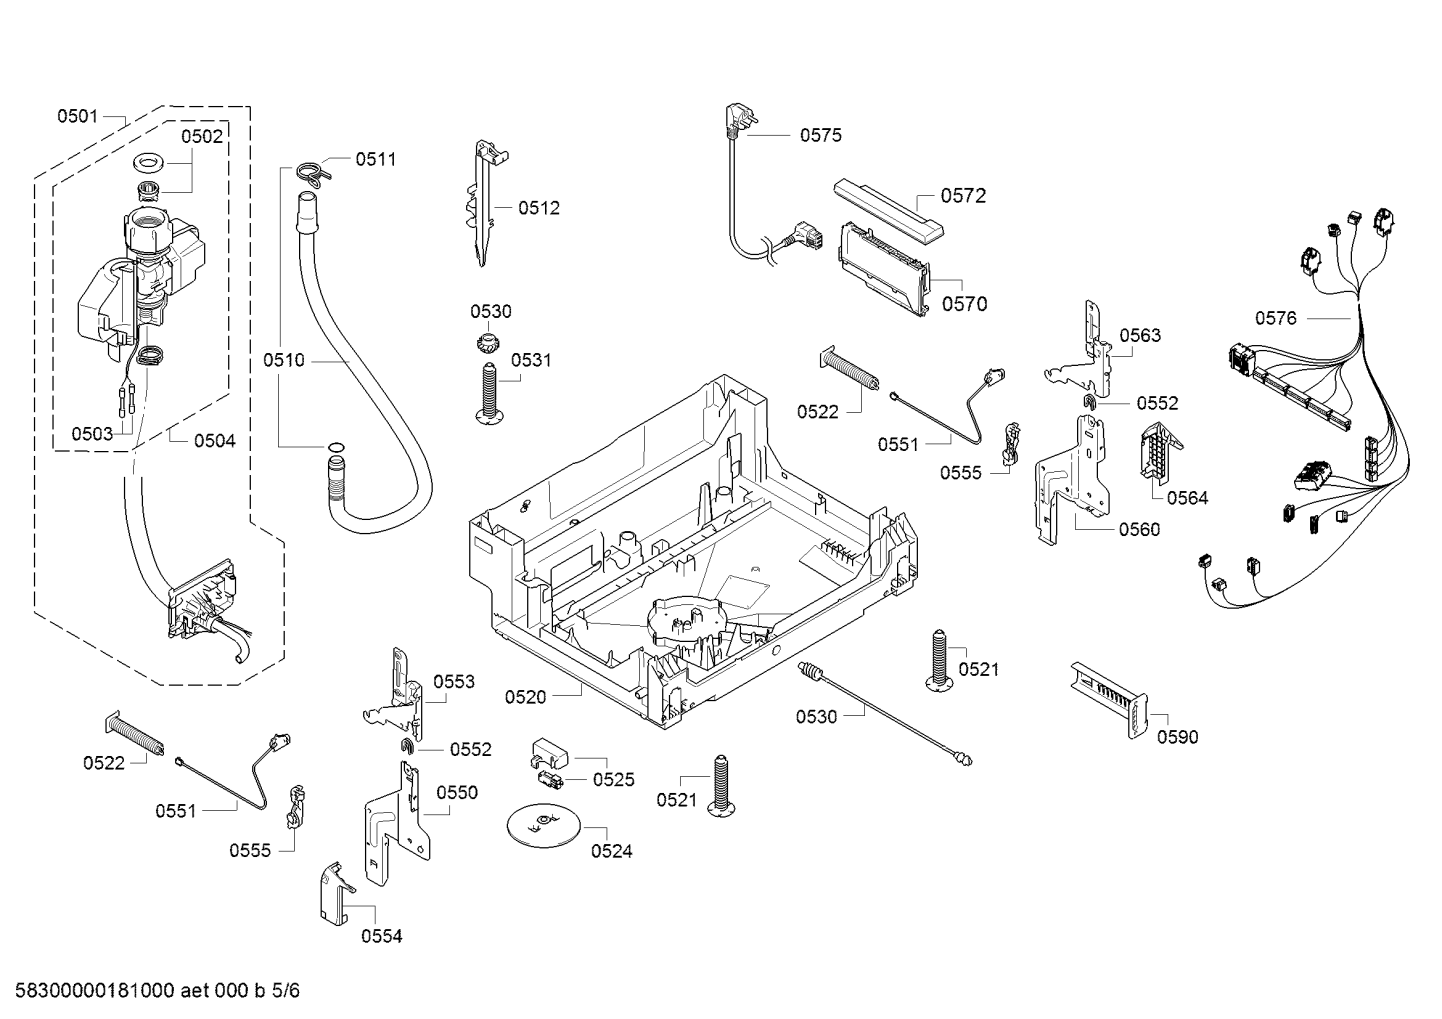 drawing_link_5_device_1749778